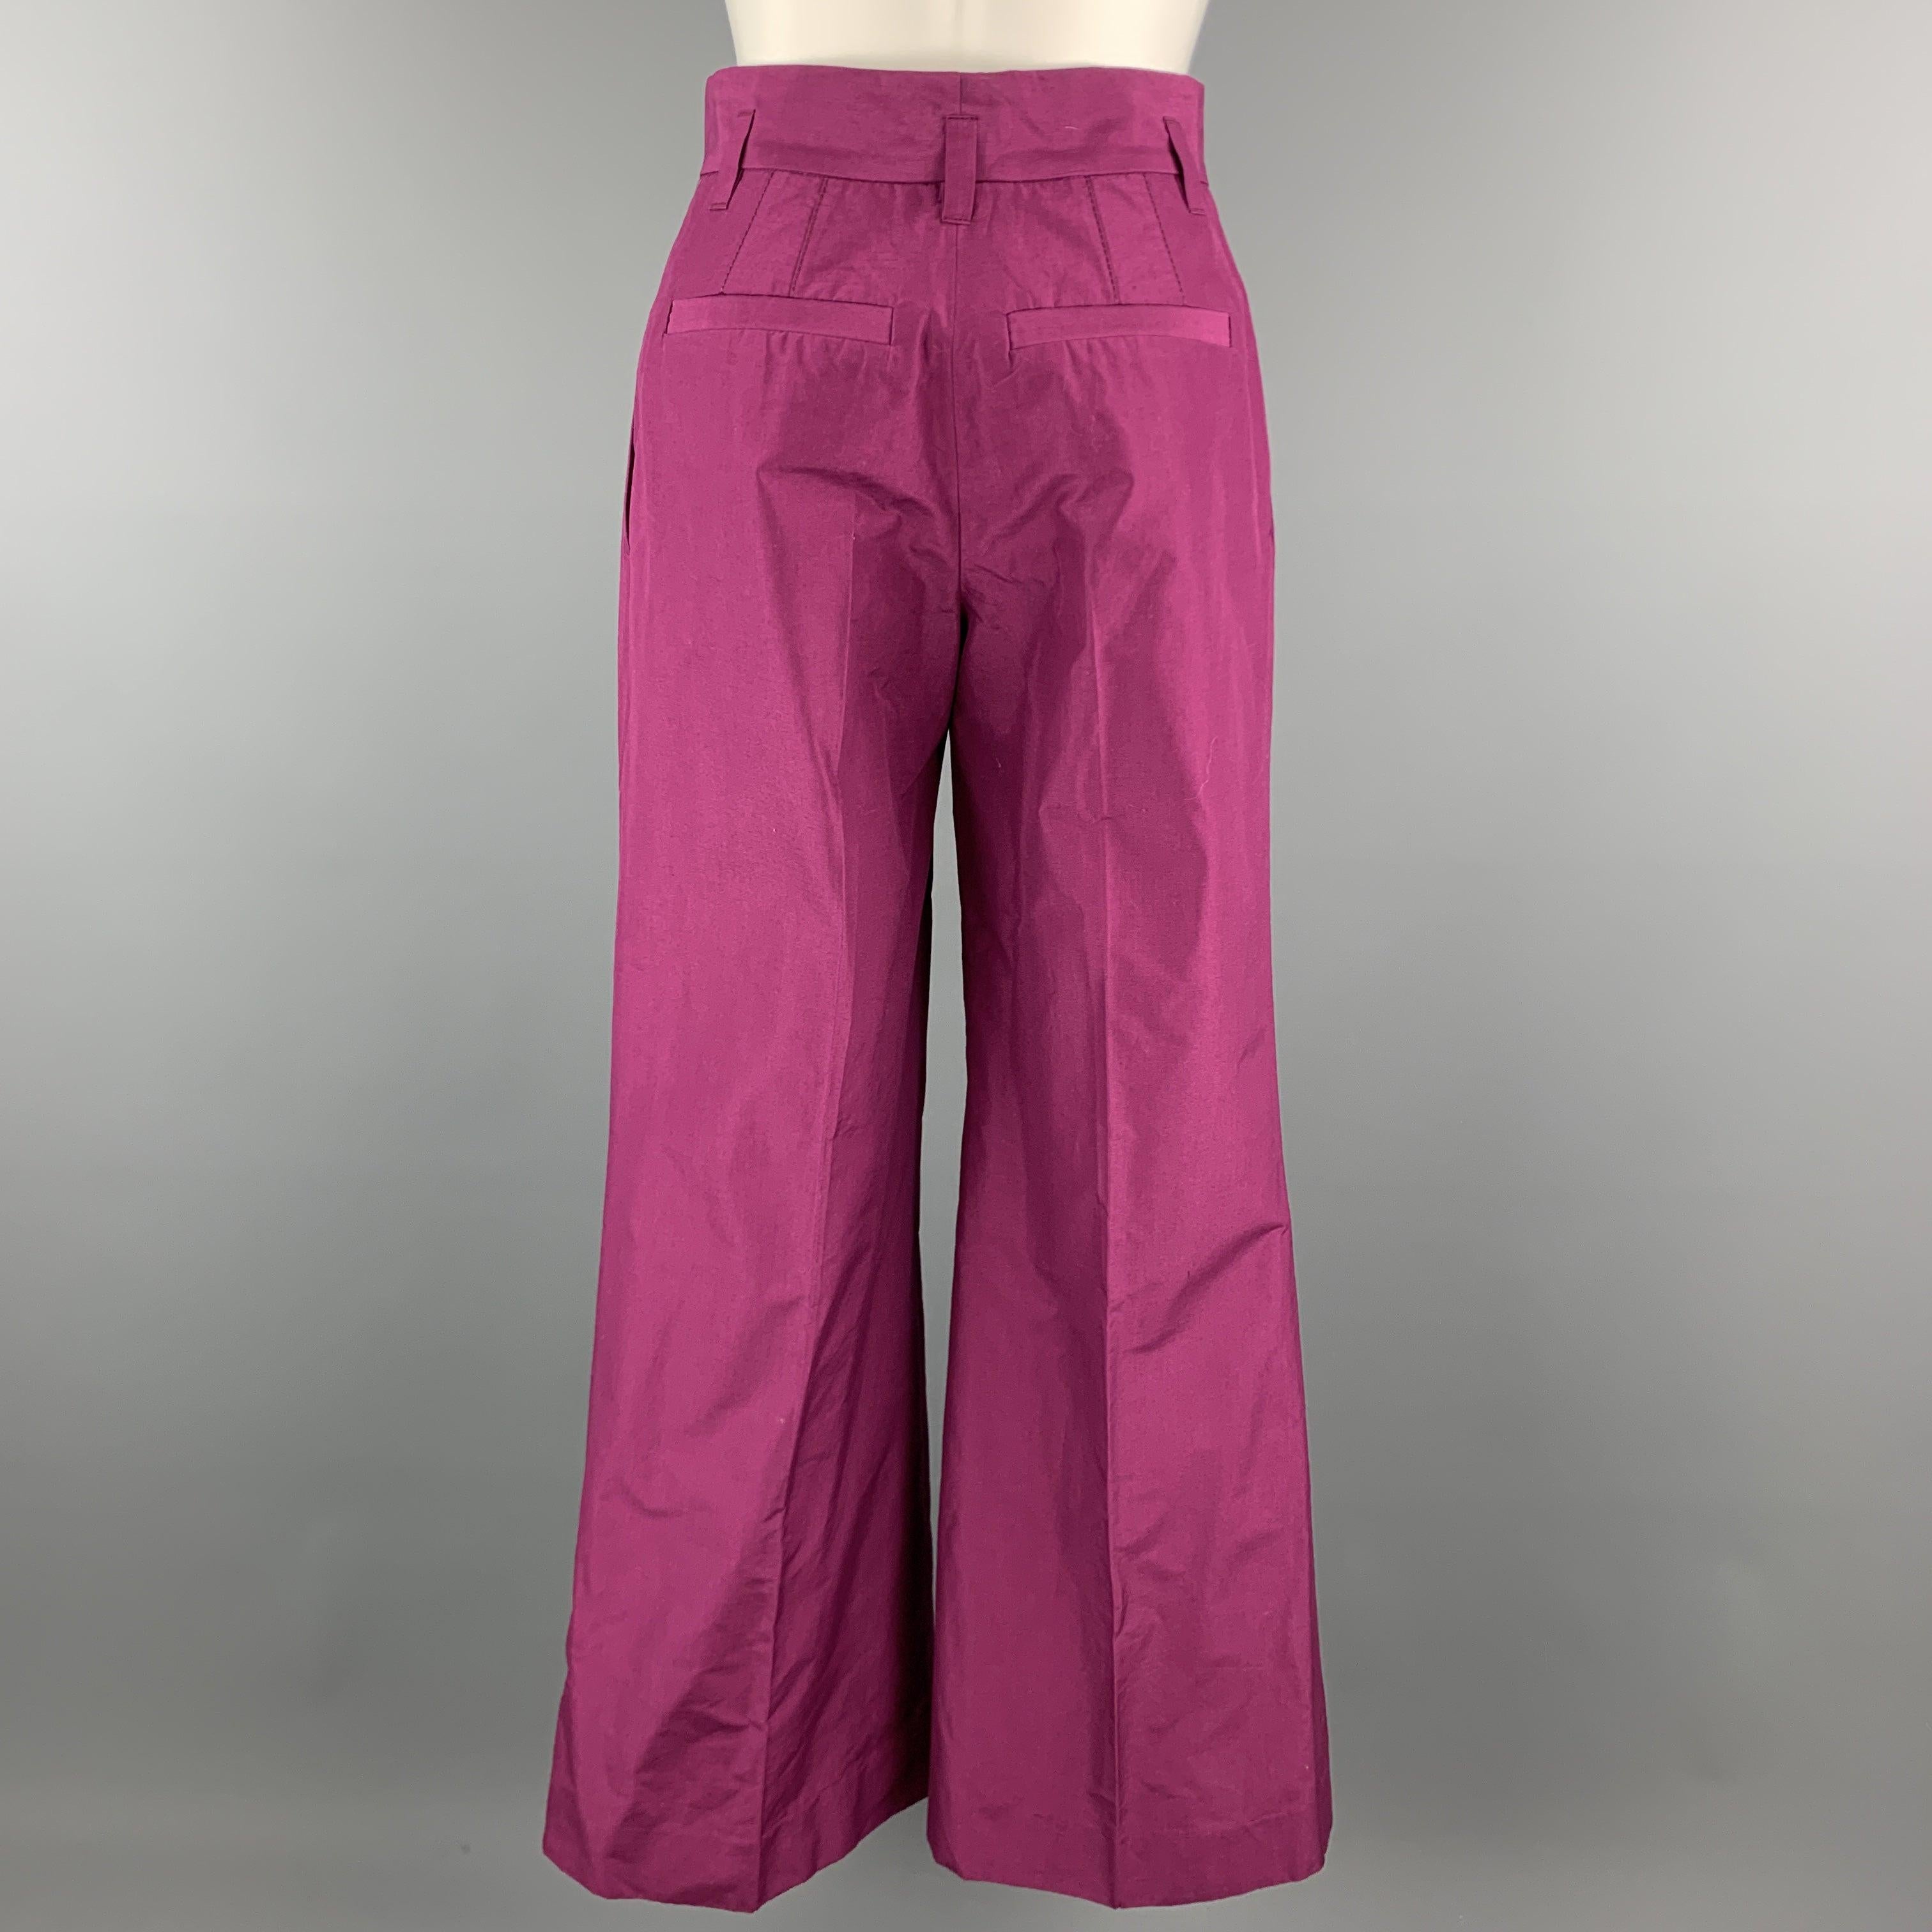 MARC JACOBS Size 0 Purple Cotton Pleated Wide Leg High Waist Dress Pants In Excellent Condition For Sale In San Francisco, CA